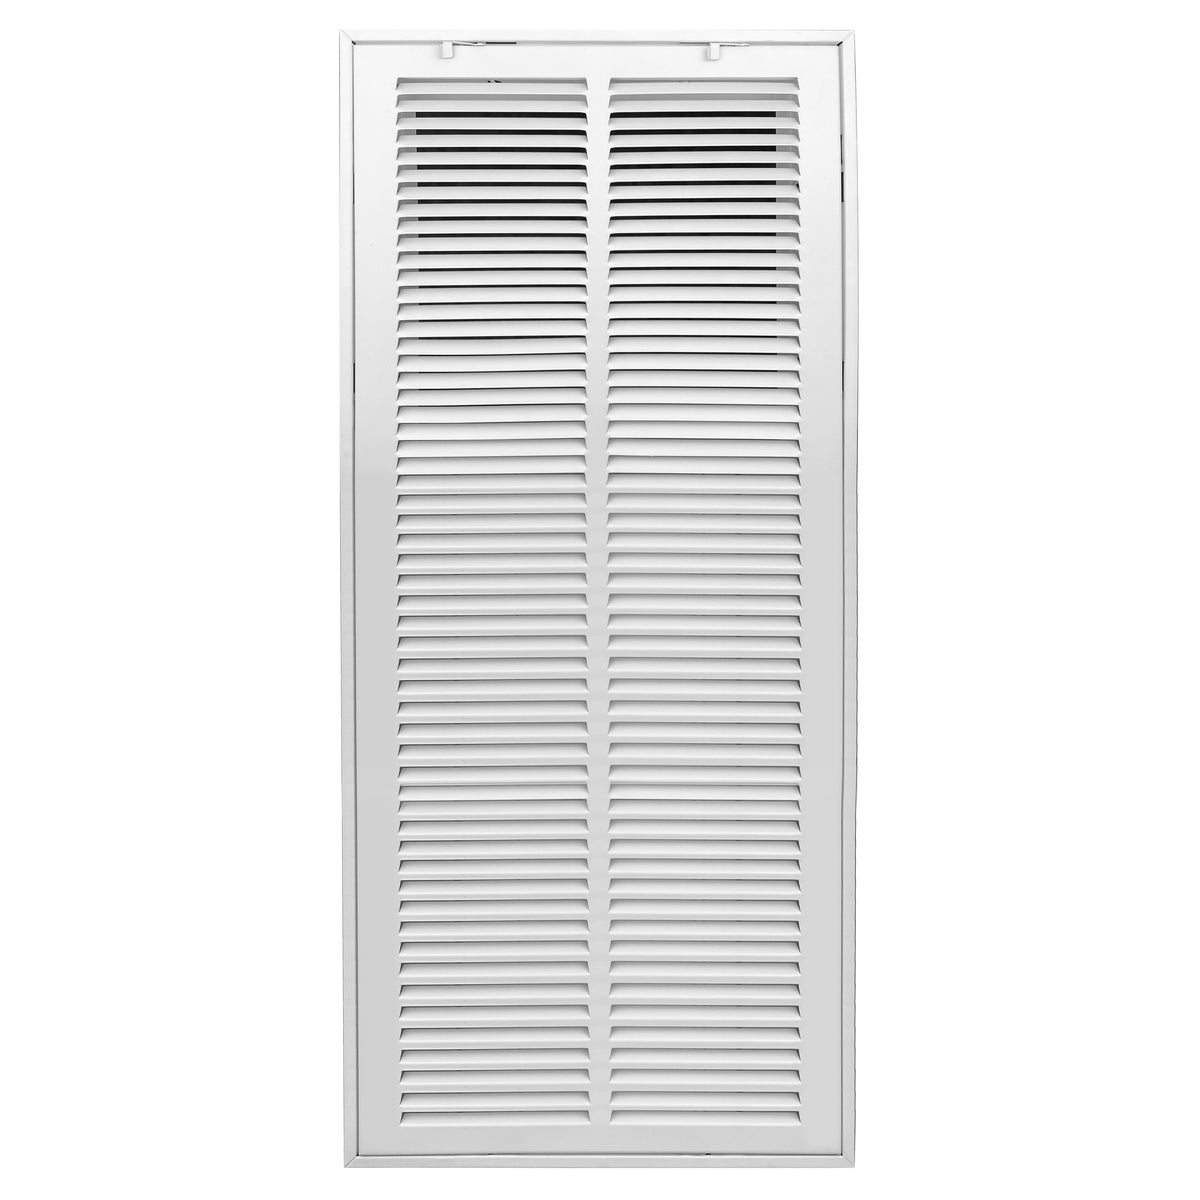 airgrilles 14" x 30" duct opening  -  hd steel return air filter grille for sidewall and ceiling (agc) 7agc-1raf-wh-14x30 756014649406 - 1